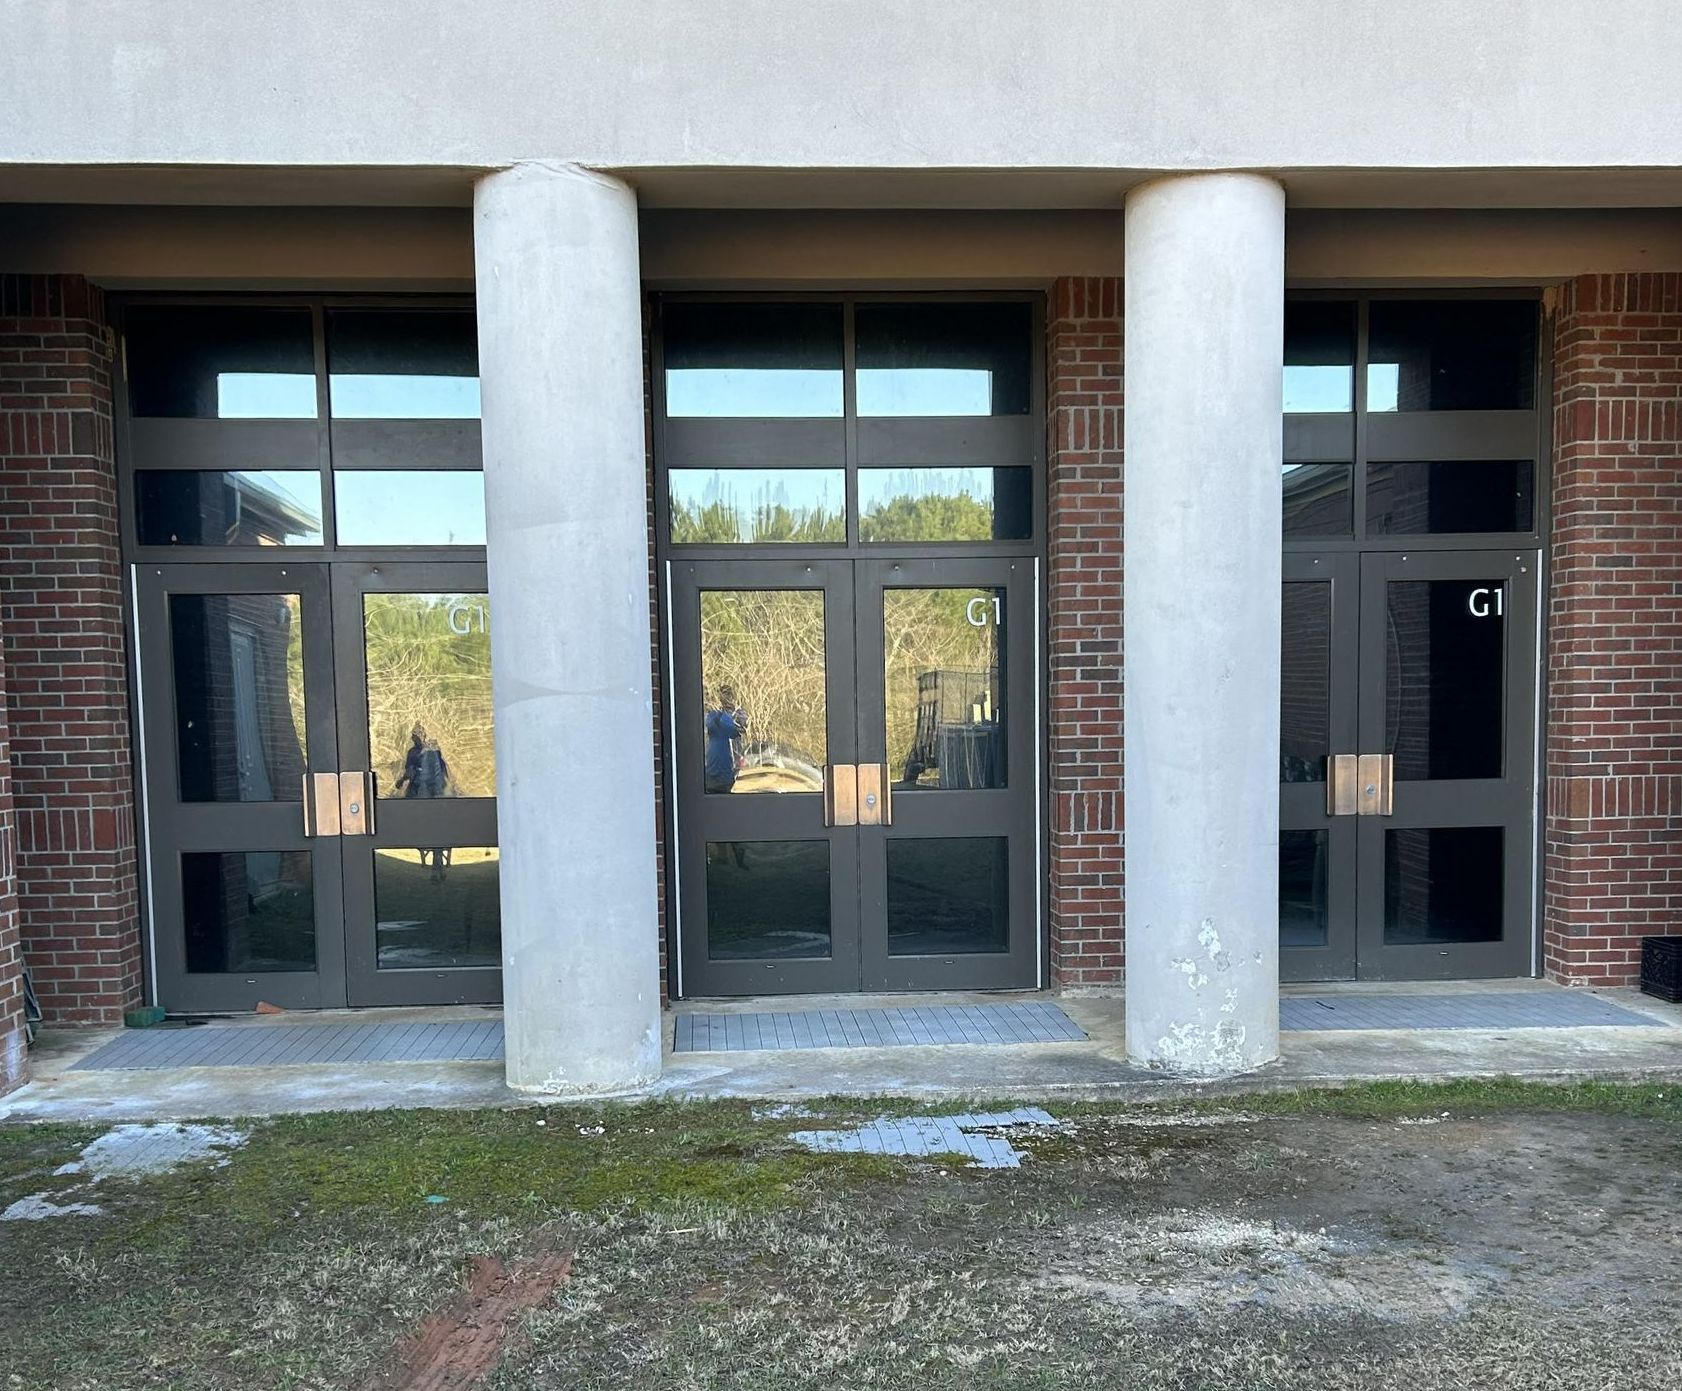 window safety and Sun reducing tint film - Sun glare & heat gain blocked by one-way private SPF Tint adding clarity and comfort inside the school gym. Auburn Opelika AL